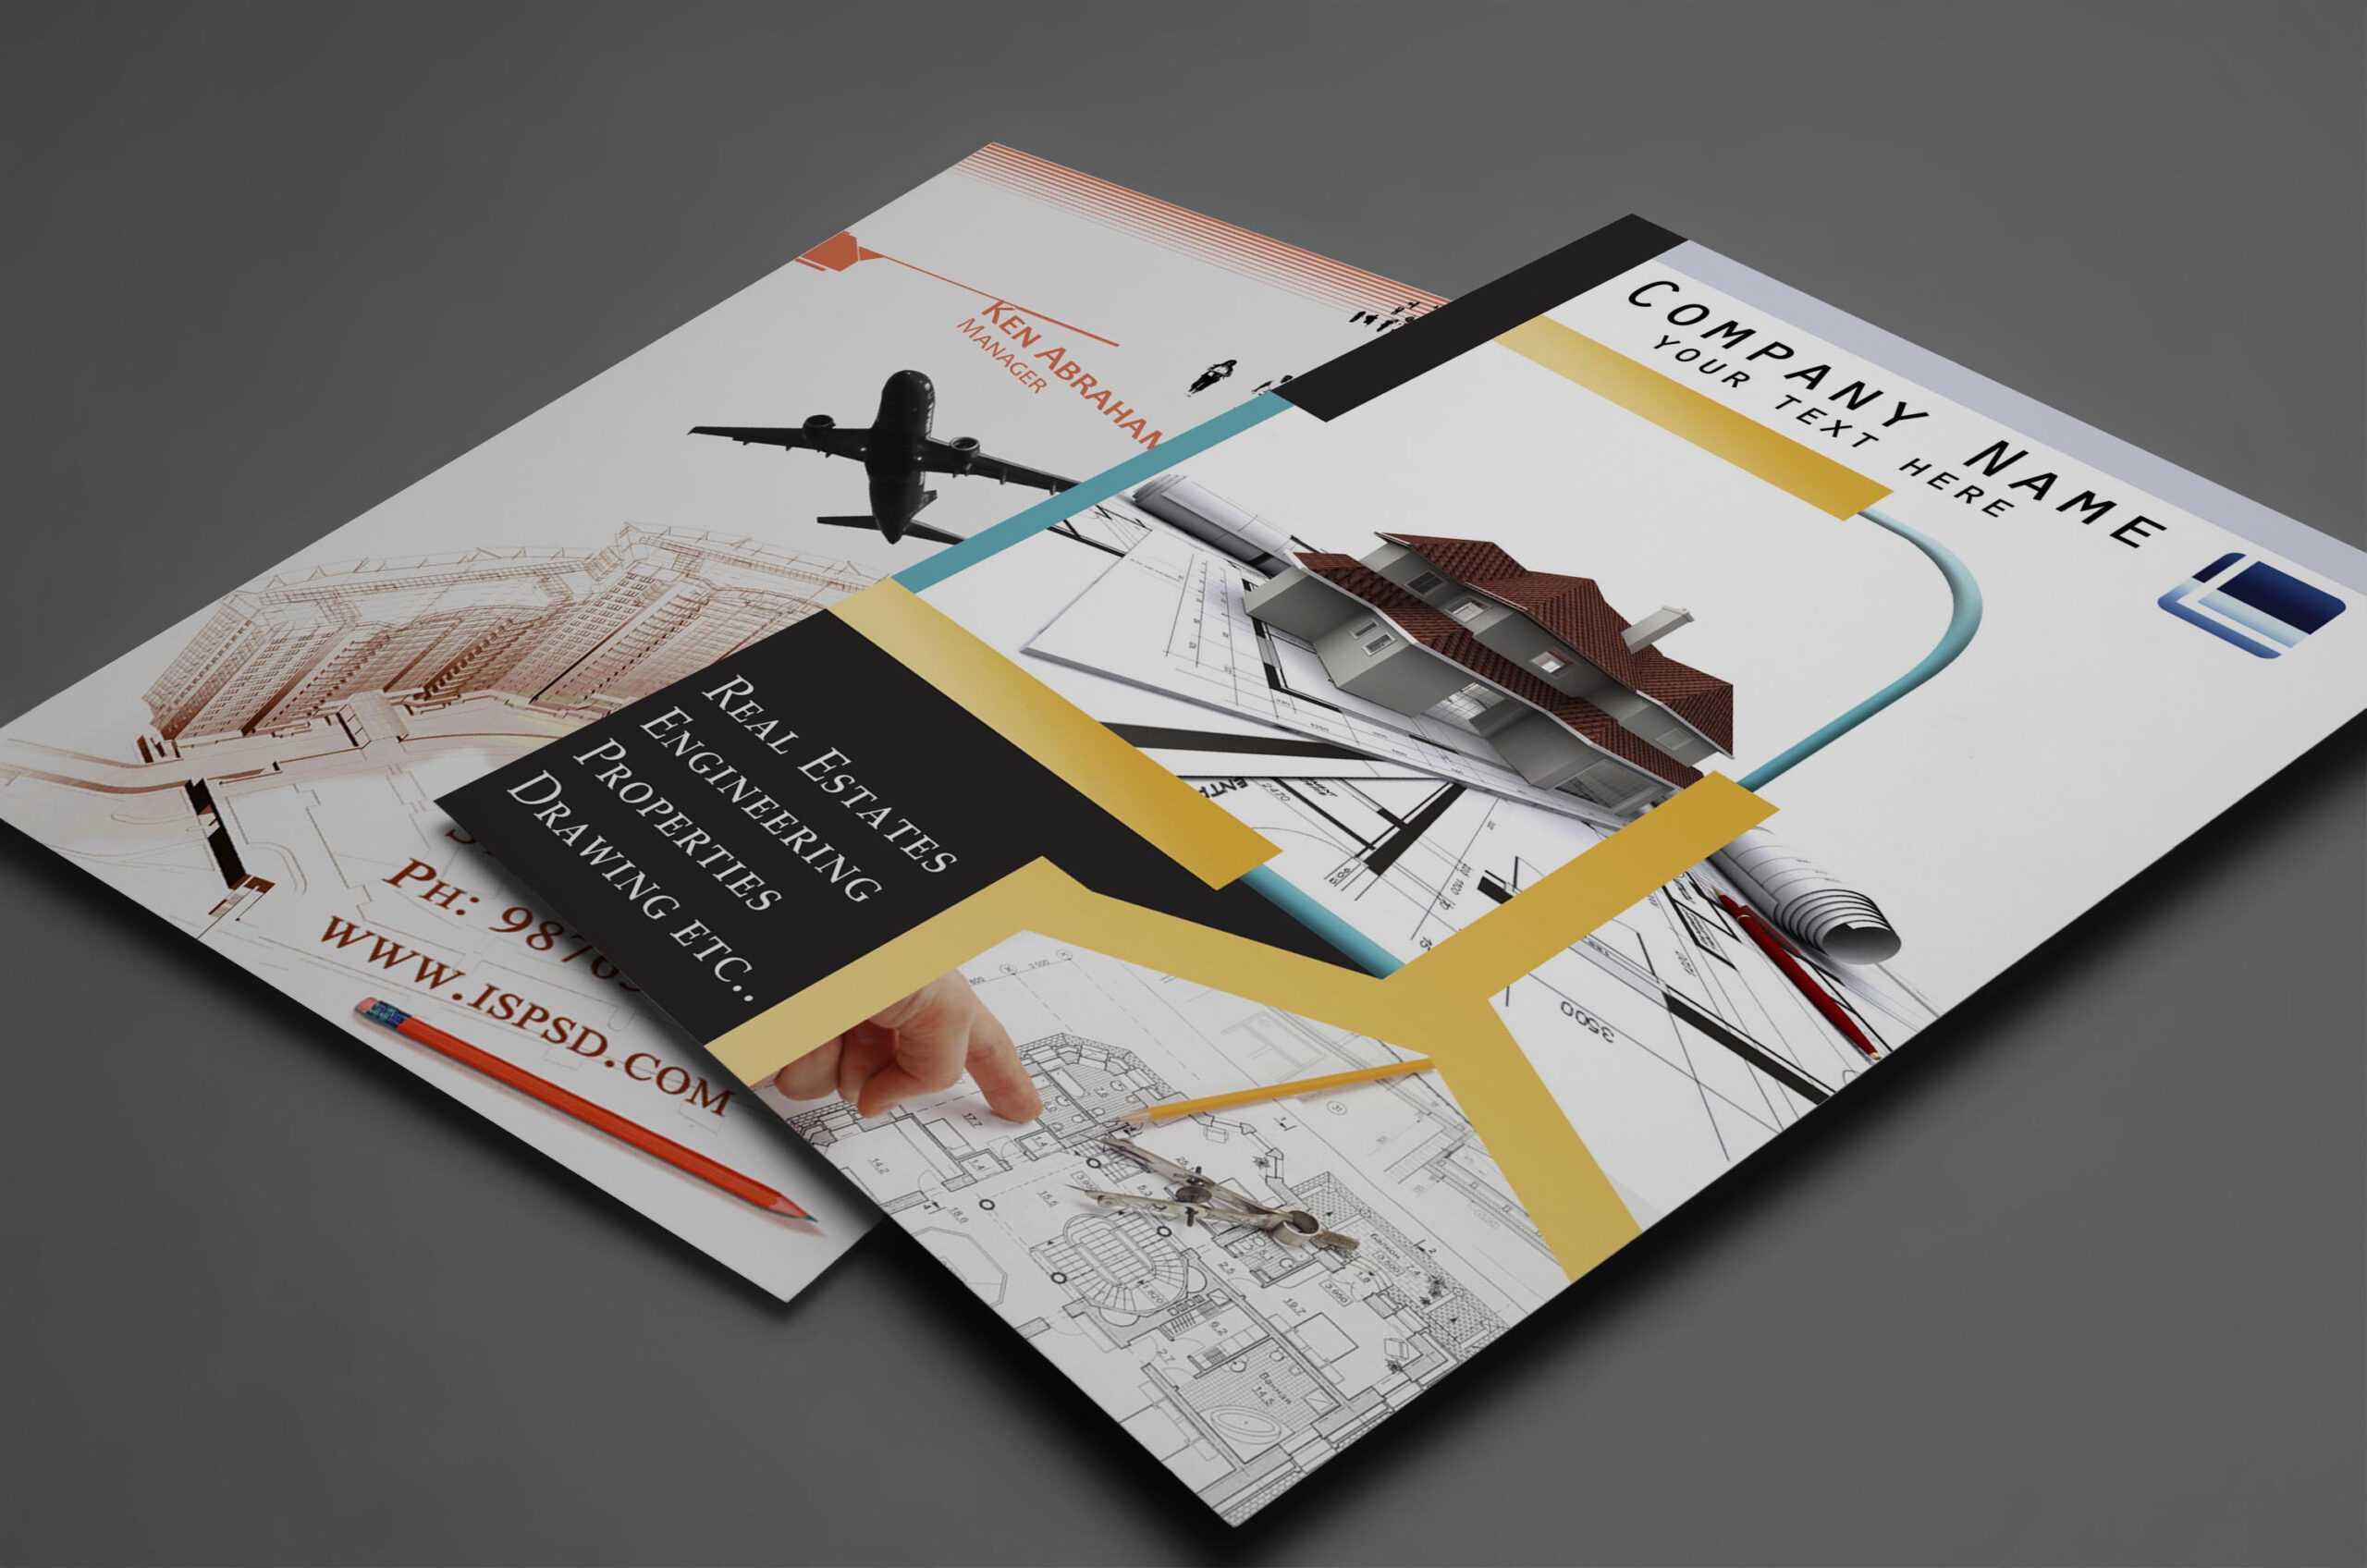 15 A3 Brochure Psd Design Images – Furniture Brochure With Regard To Real Estate Brochure Templates Psd Free Download